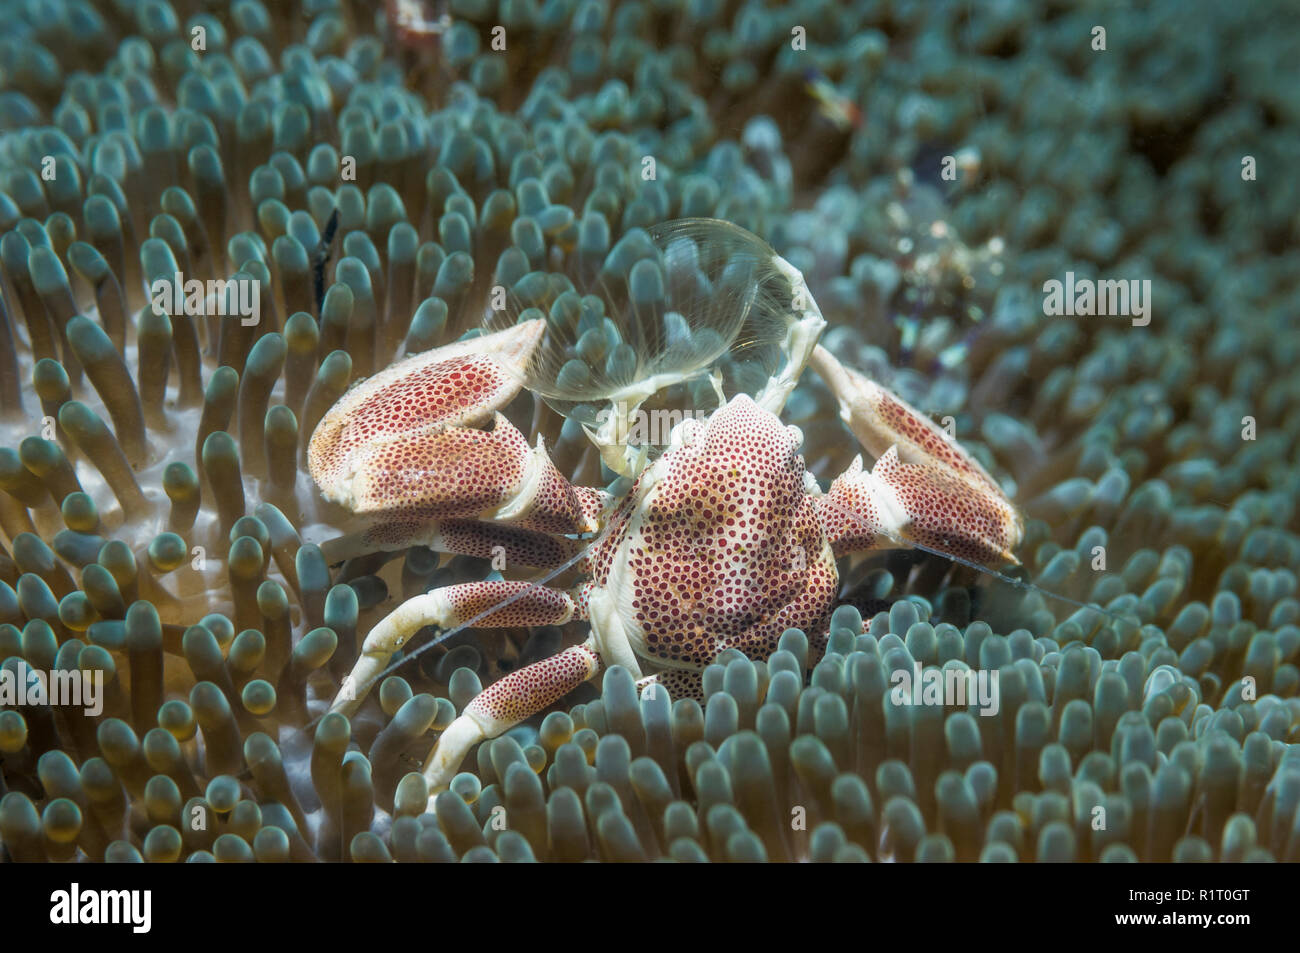 Spotted porcelain crab [Neopetrolisthes maculata].  West Papua, Indonesia. Stock Photo